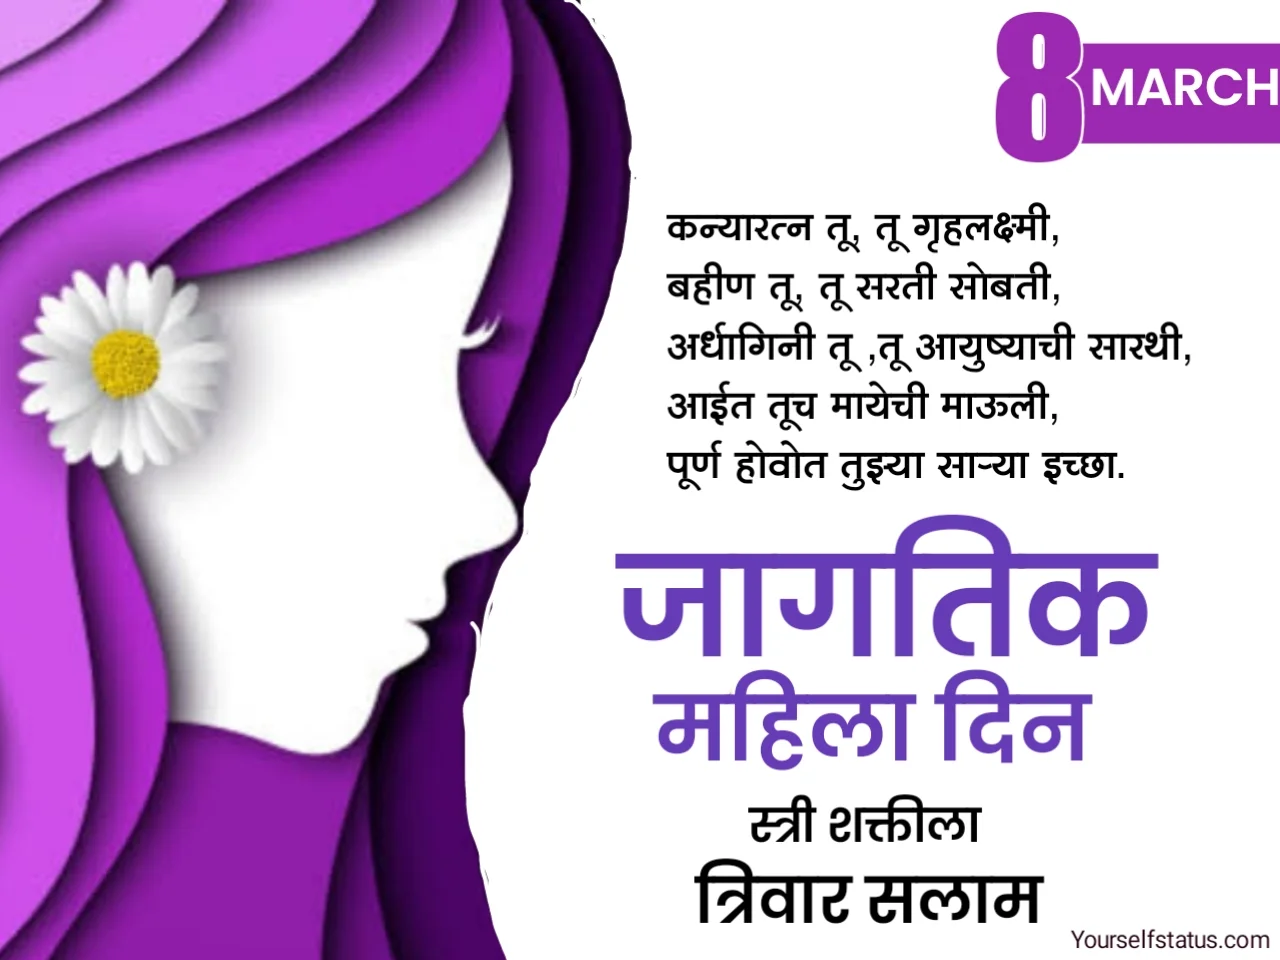 Women's day images in marathi